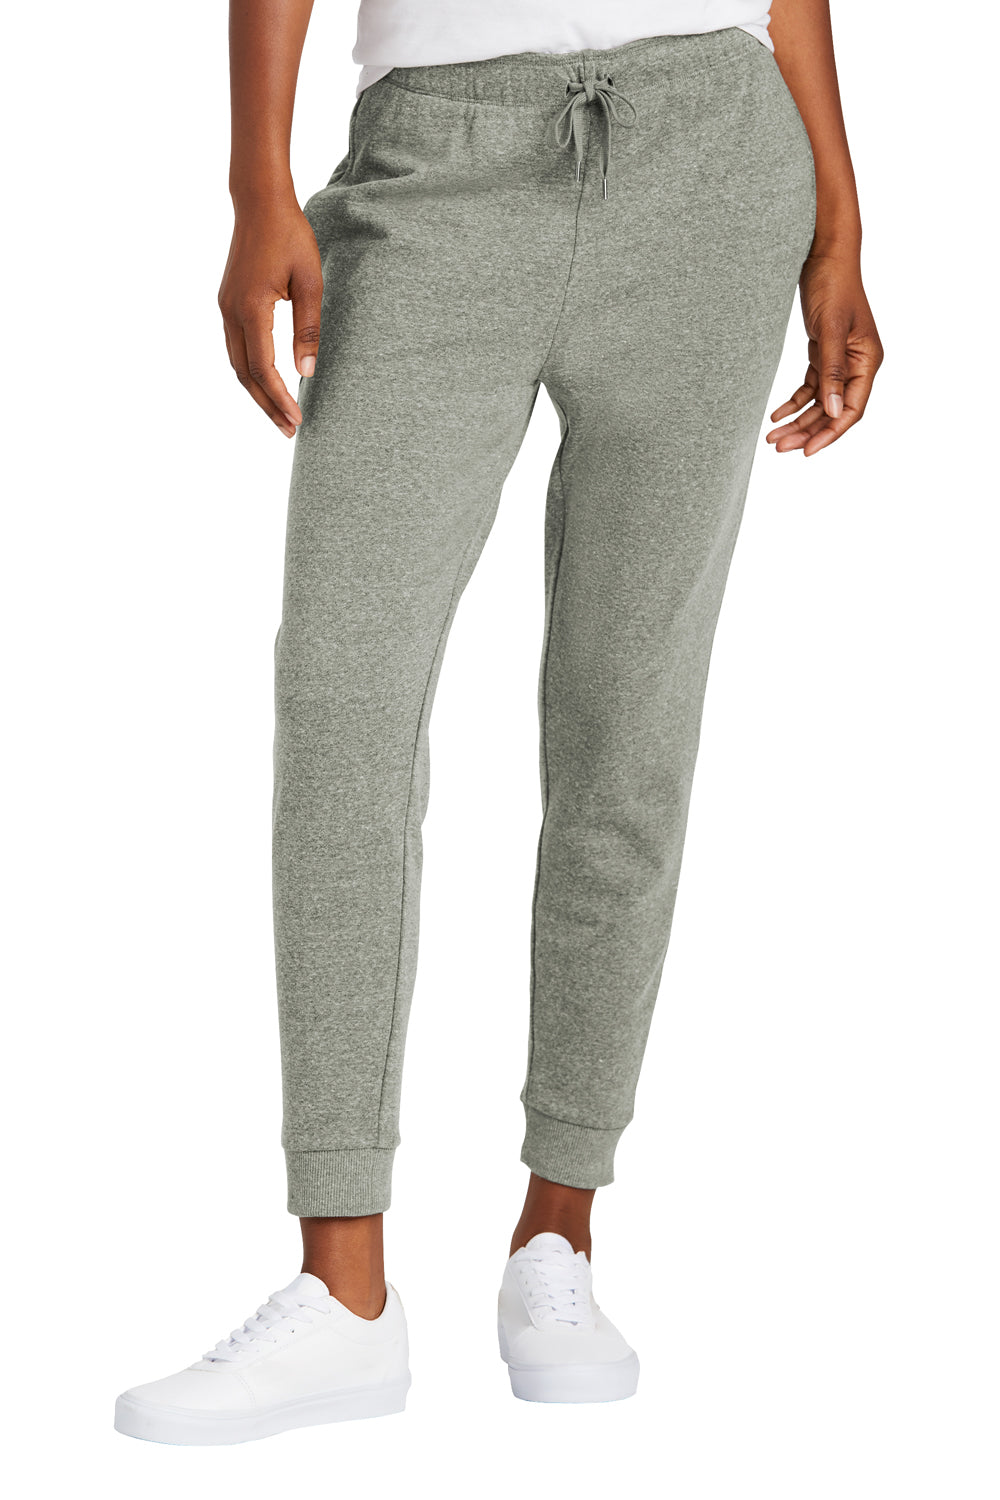 District DT1310 Womens Perfect Tri Fleece Jogger Sweatpants w/ Pockets Grey Frost Front